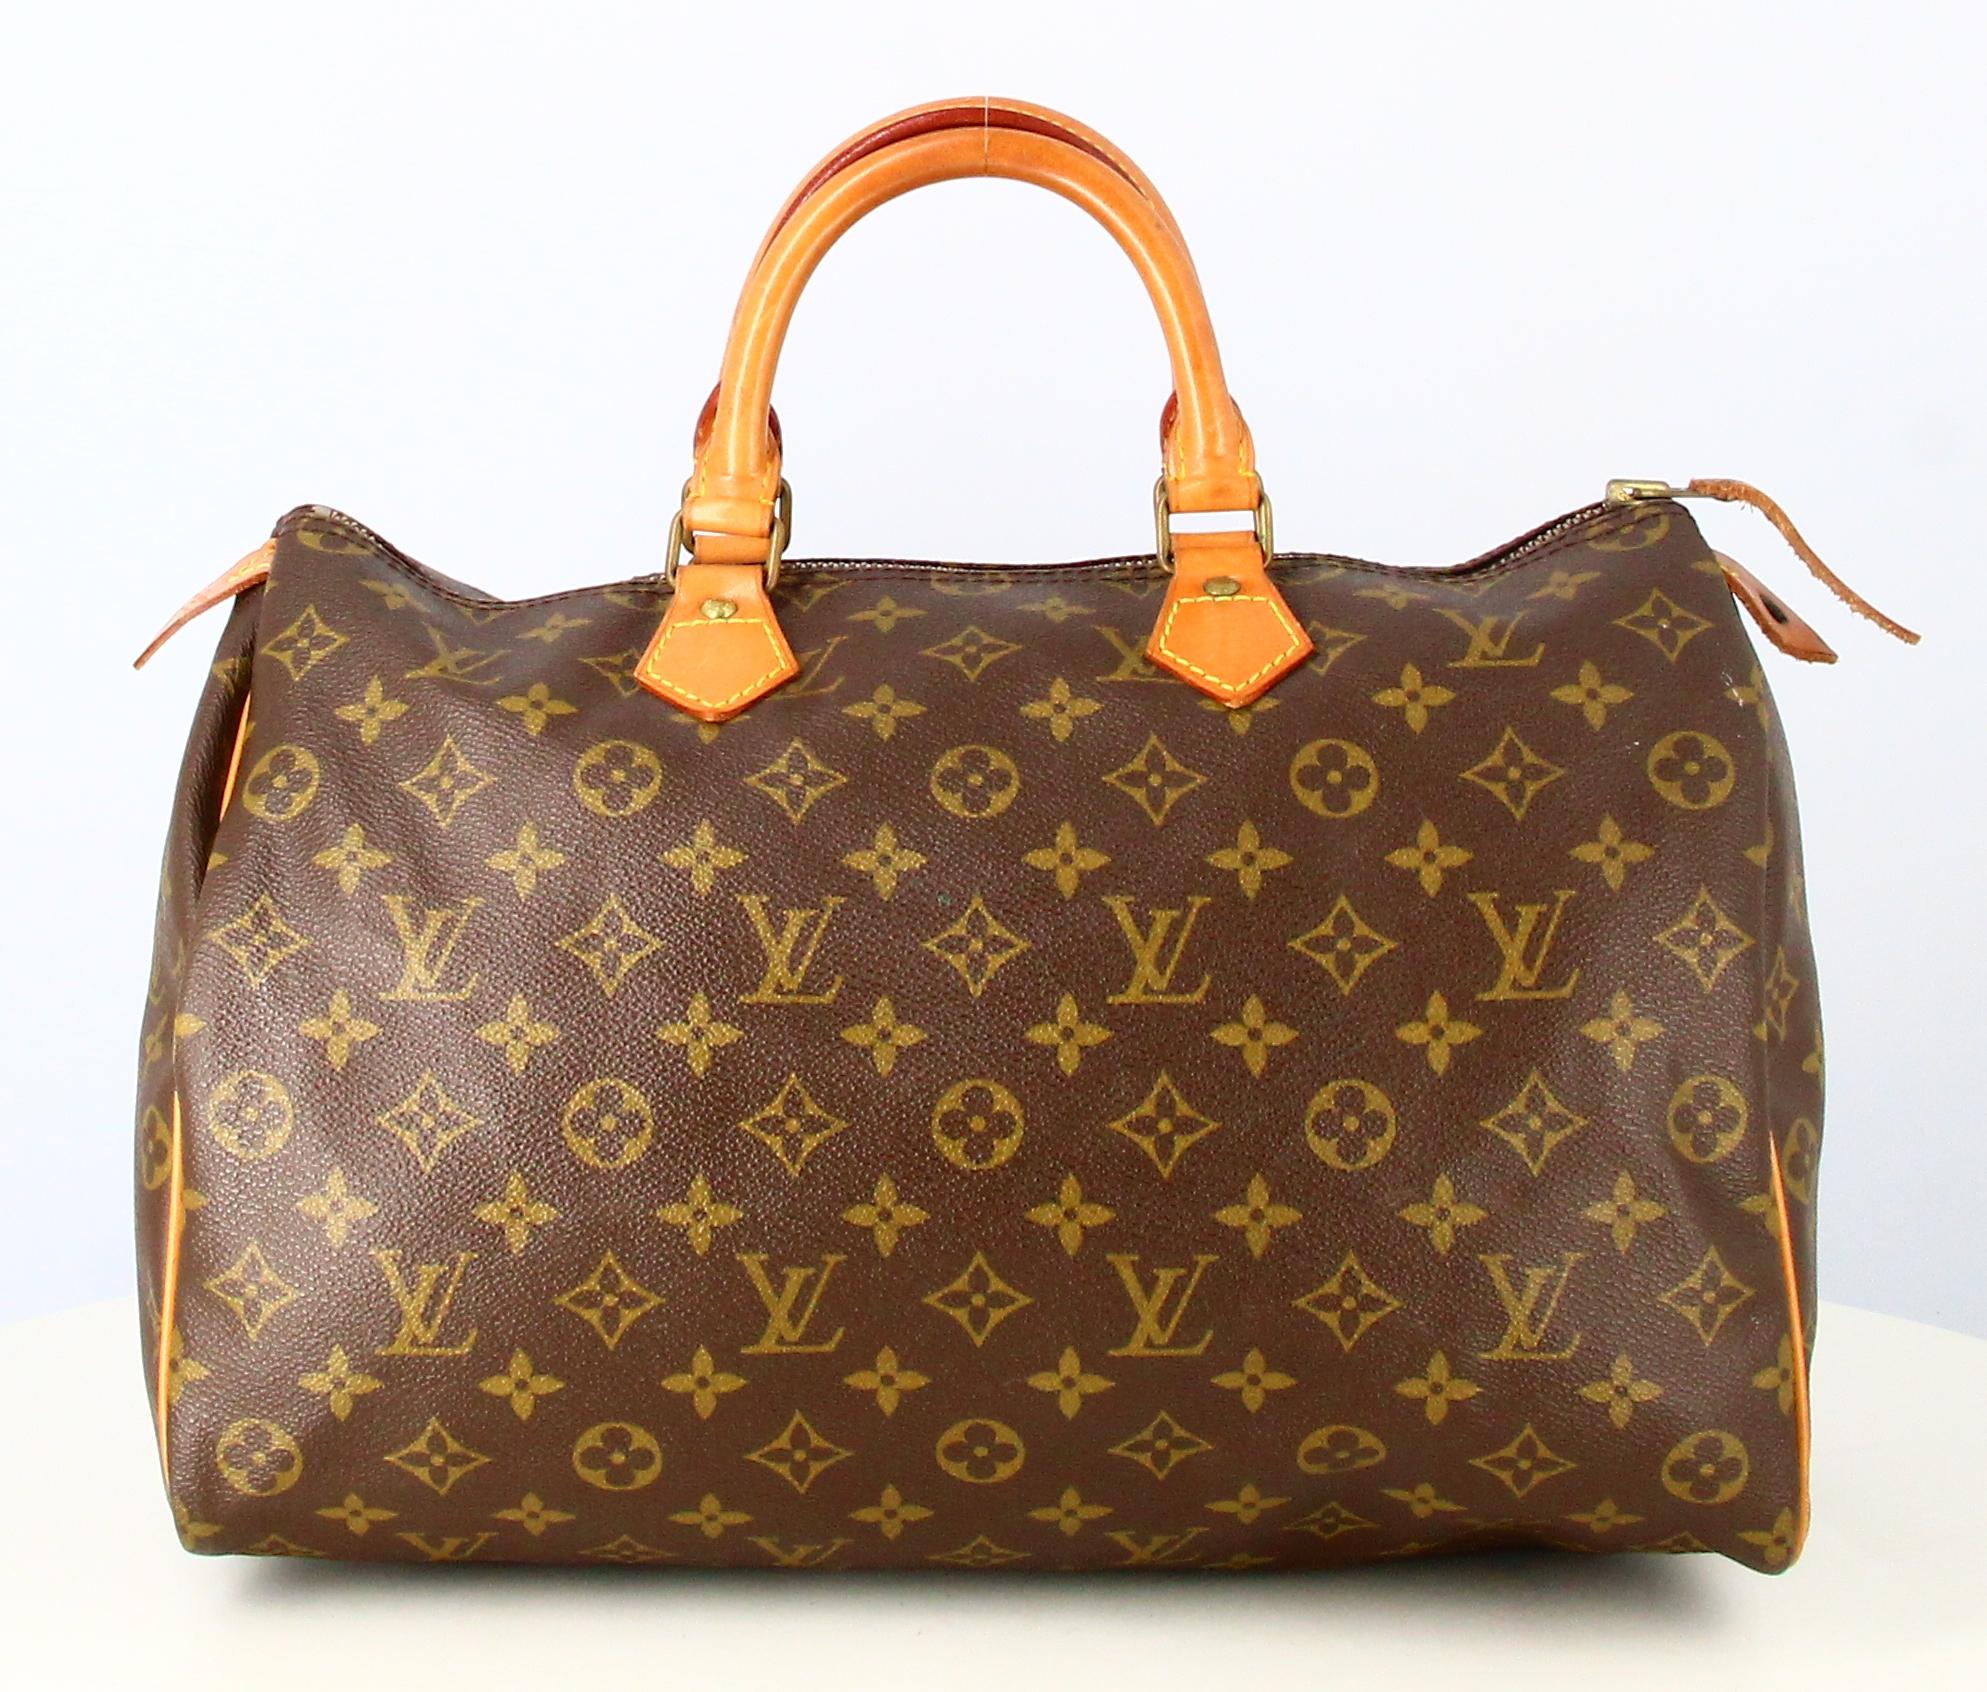 Louis Vuitton Speedy Handbag Size 35 Monogram Canvas

- Good condition. Shows signs of wear over time.
- Louis Vuitton Handbag 
- Speedy monogram canvas
- Two small brown leather straps 
- Clasp: golden zip